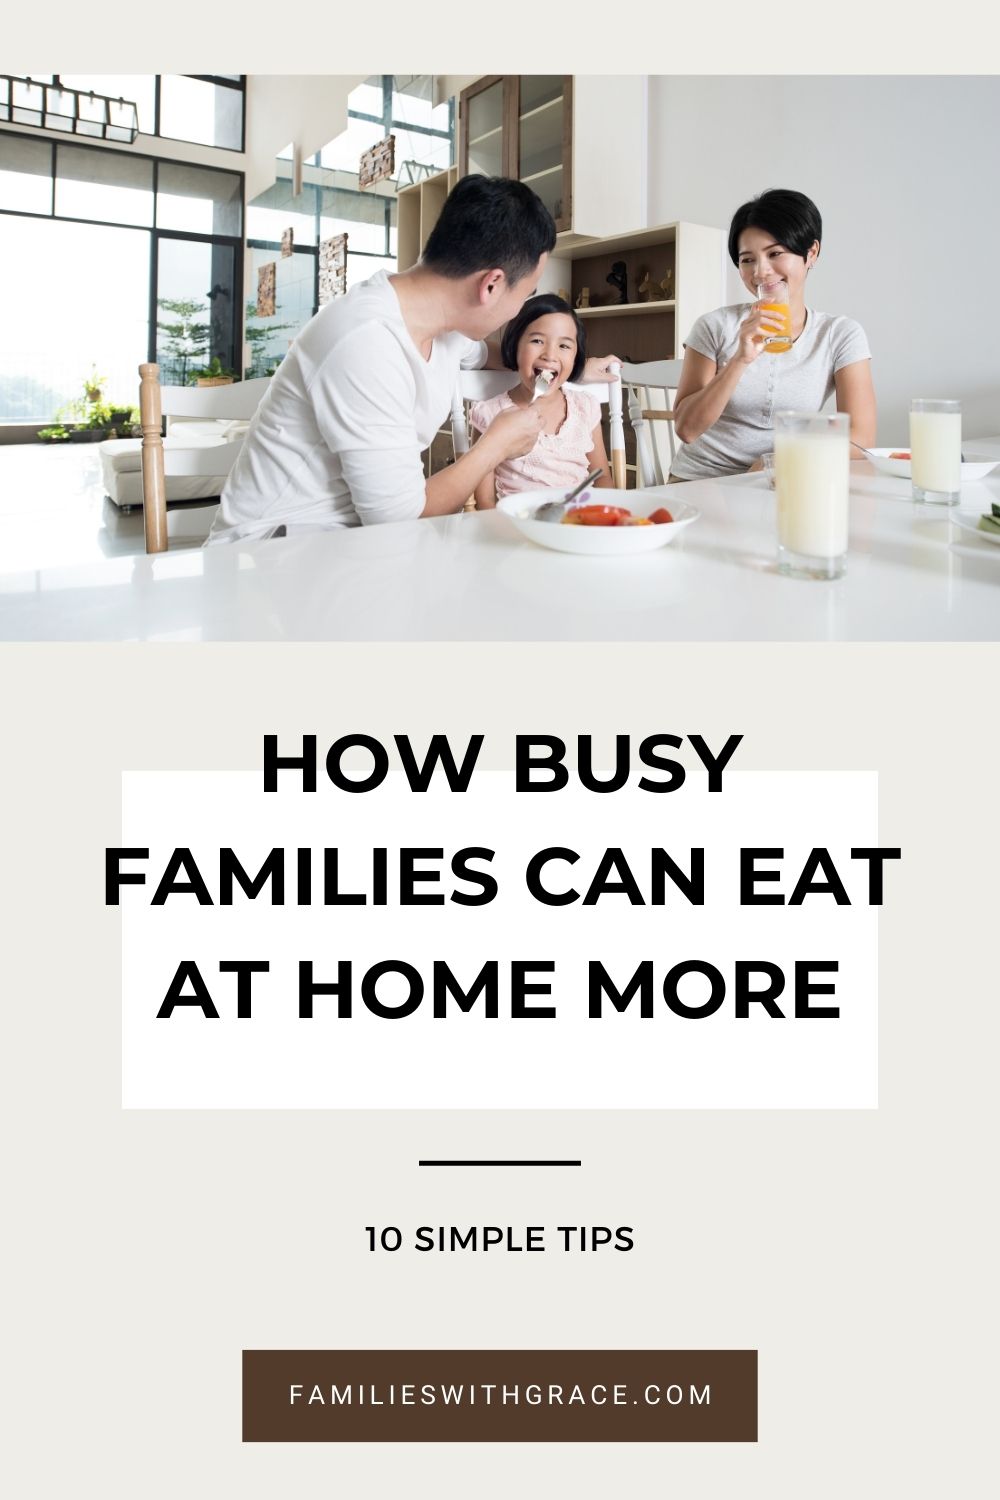 How to stop eating out as much: 10 Tips for busy families